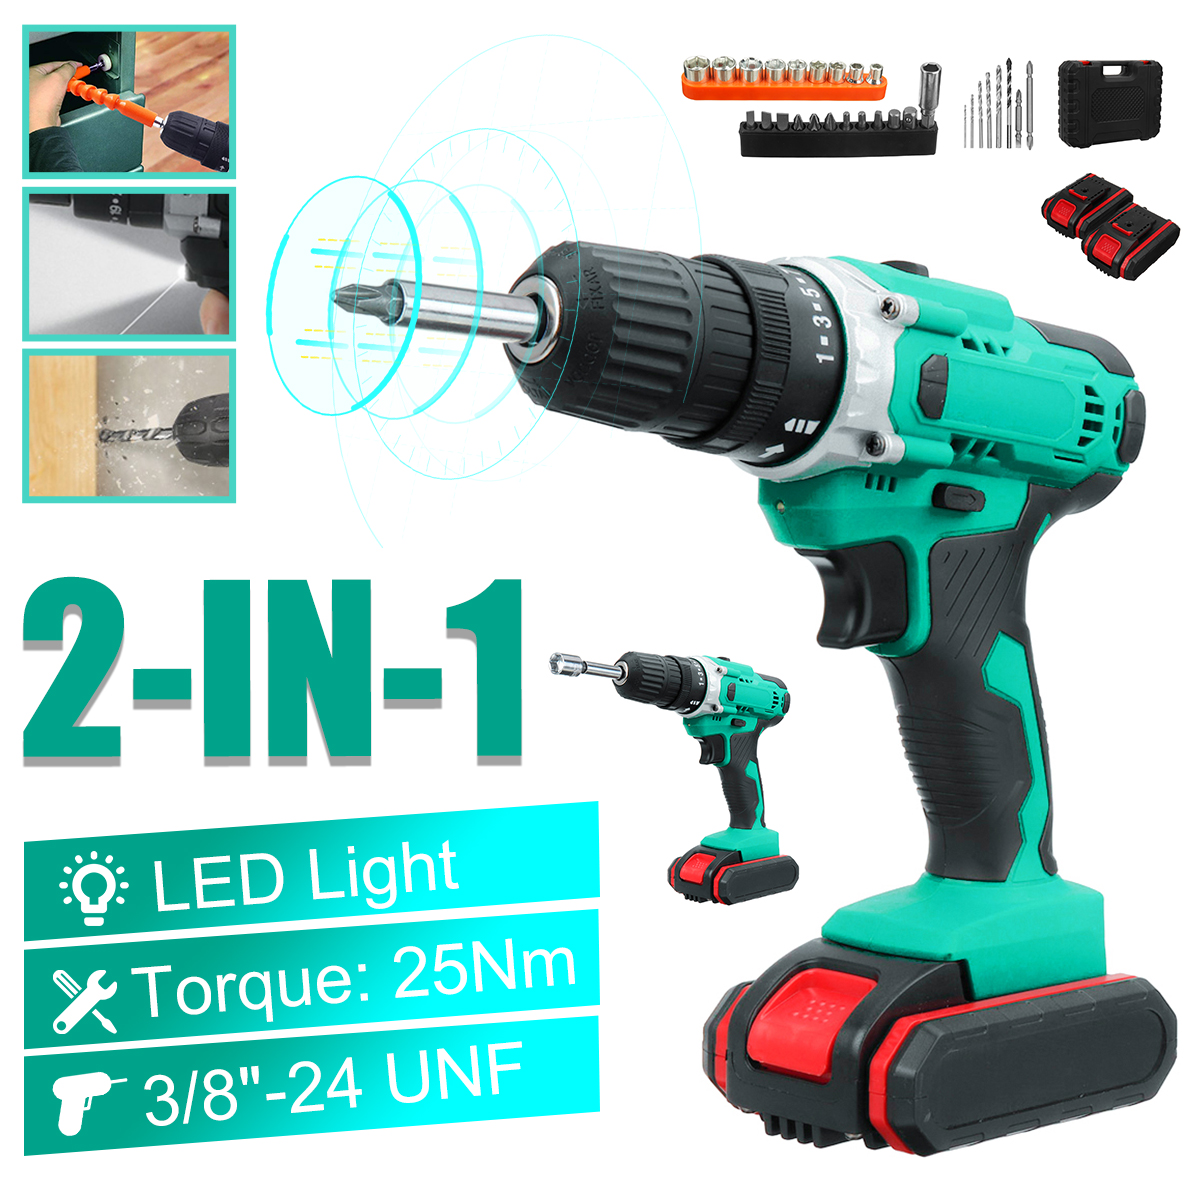 Cordless-Electric-Drill-Rechargeable-Drill-Screwdriver-Power-Tool-LED-W-12pcs-Battery-1847803-2